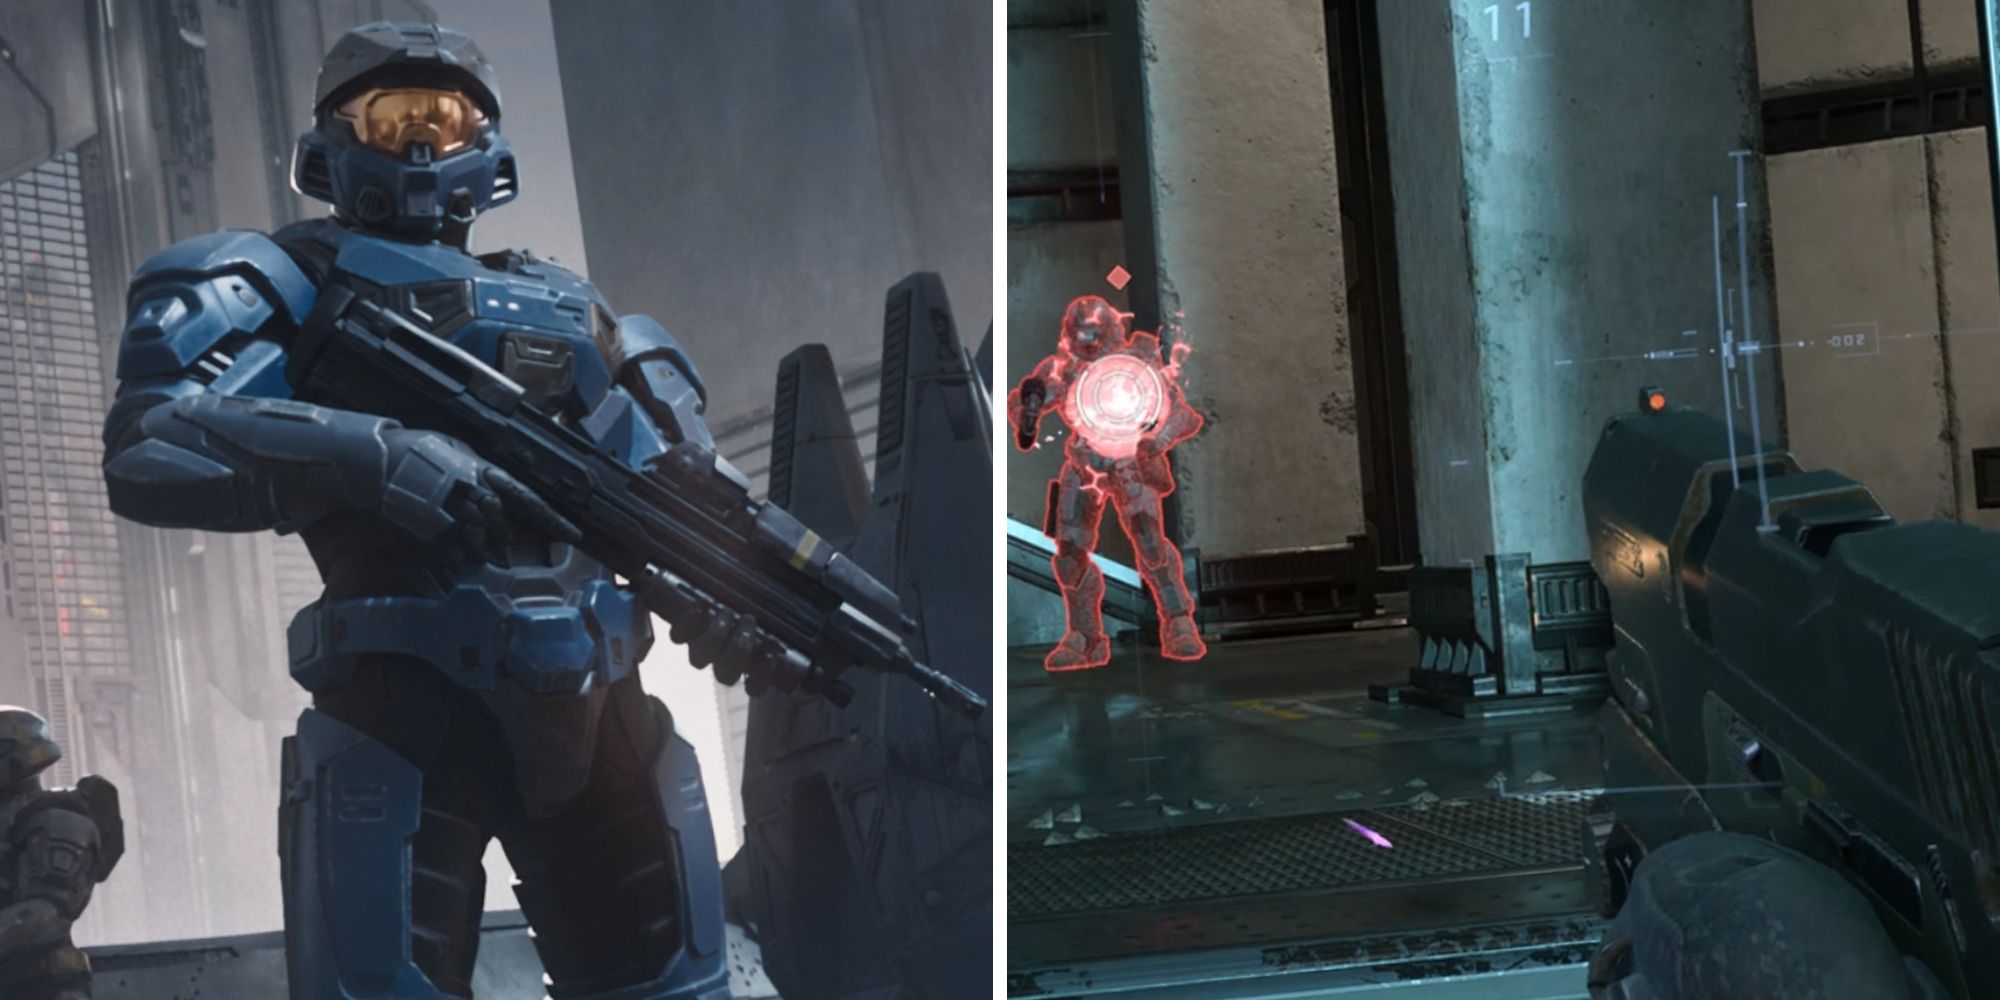 Halo Infinite split image. character wearing bulky blue armour on left and gun sights aimed at an enemy on the right.